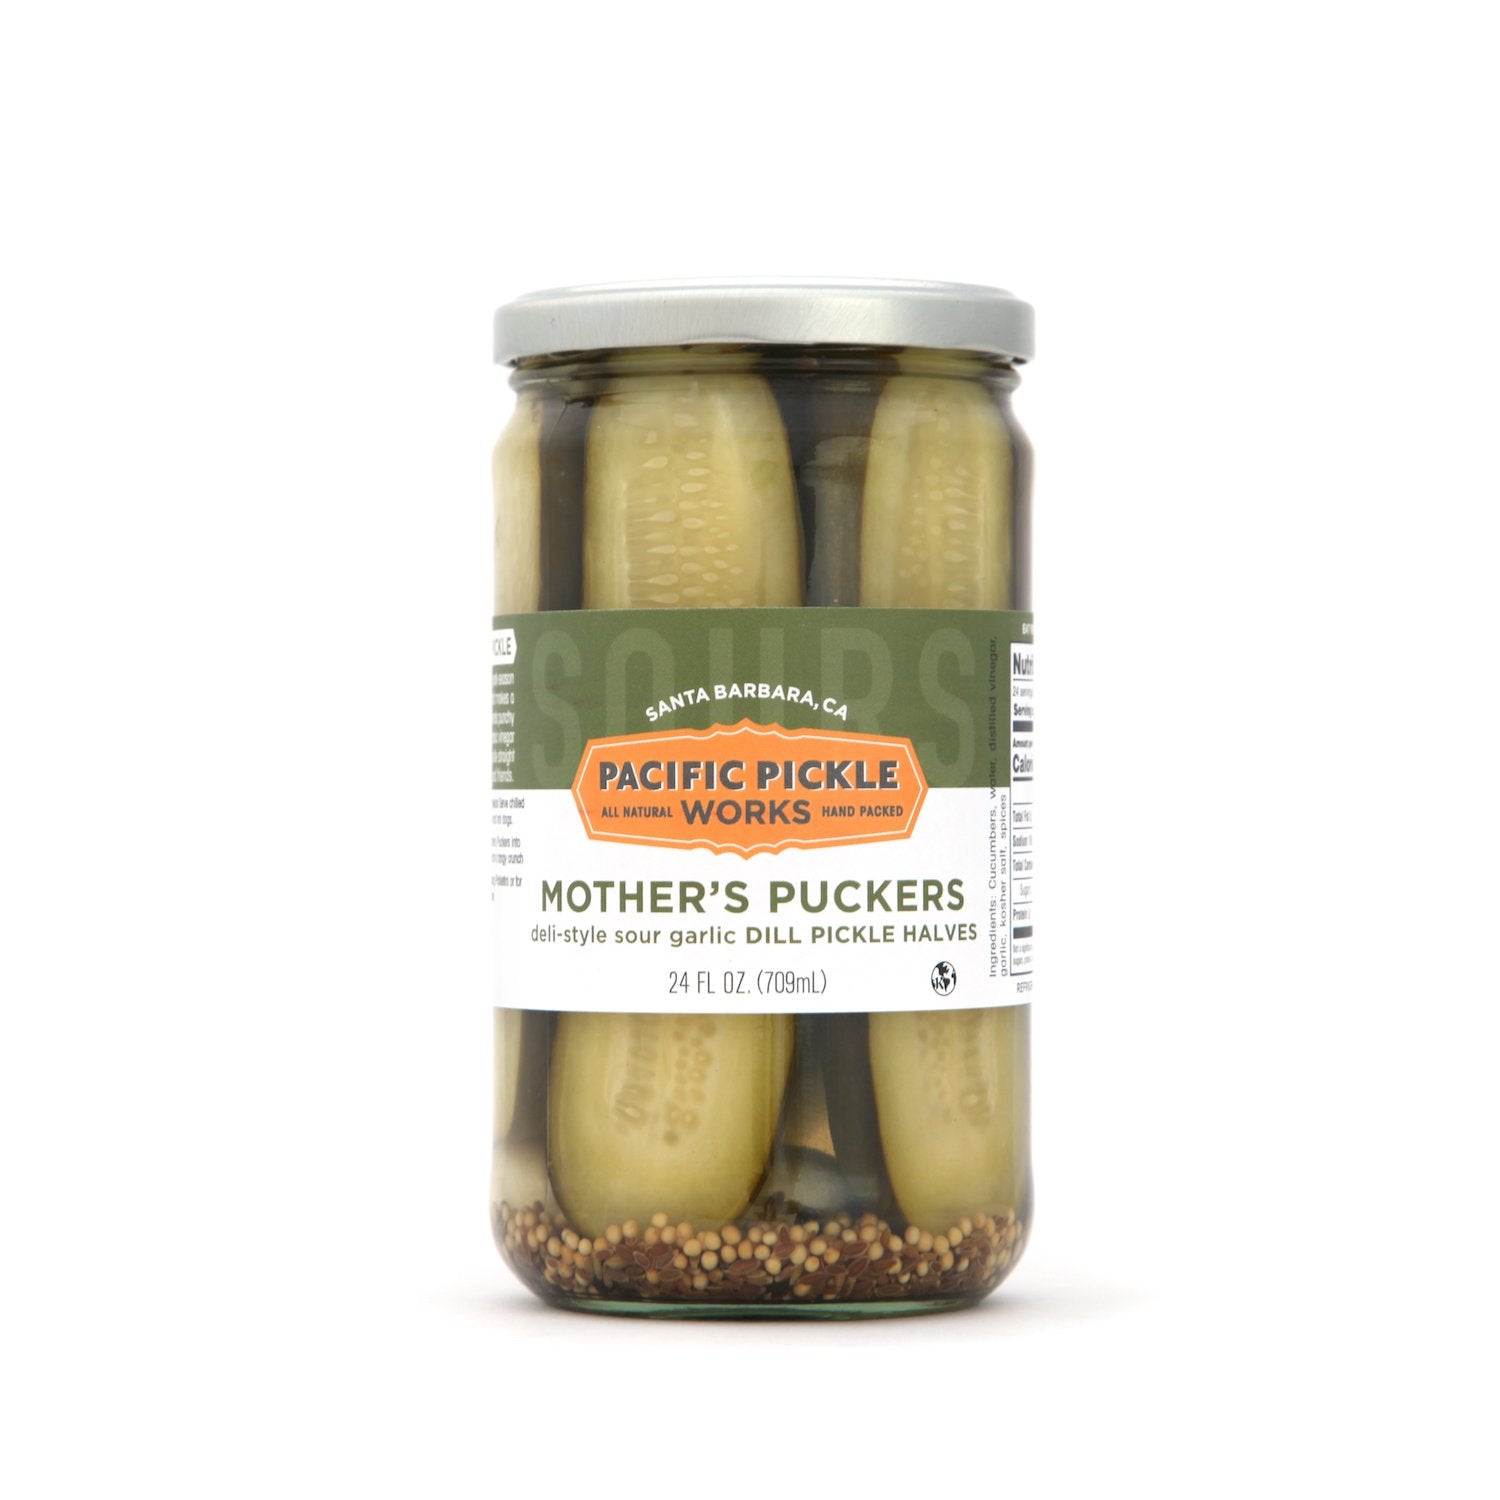 Pacific Pickle Works, Mother's Puckers, 24 oz